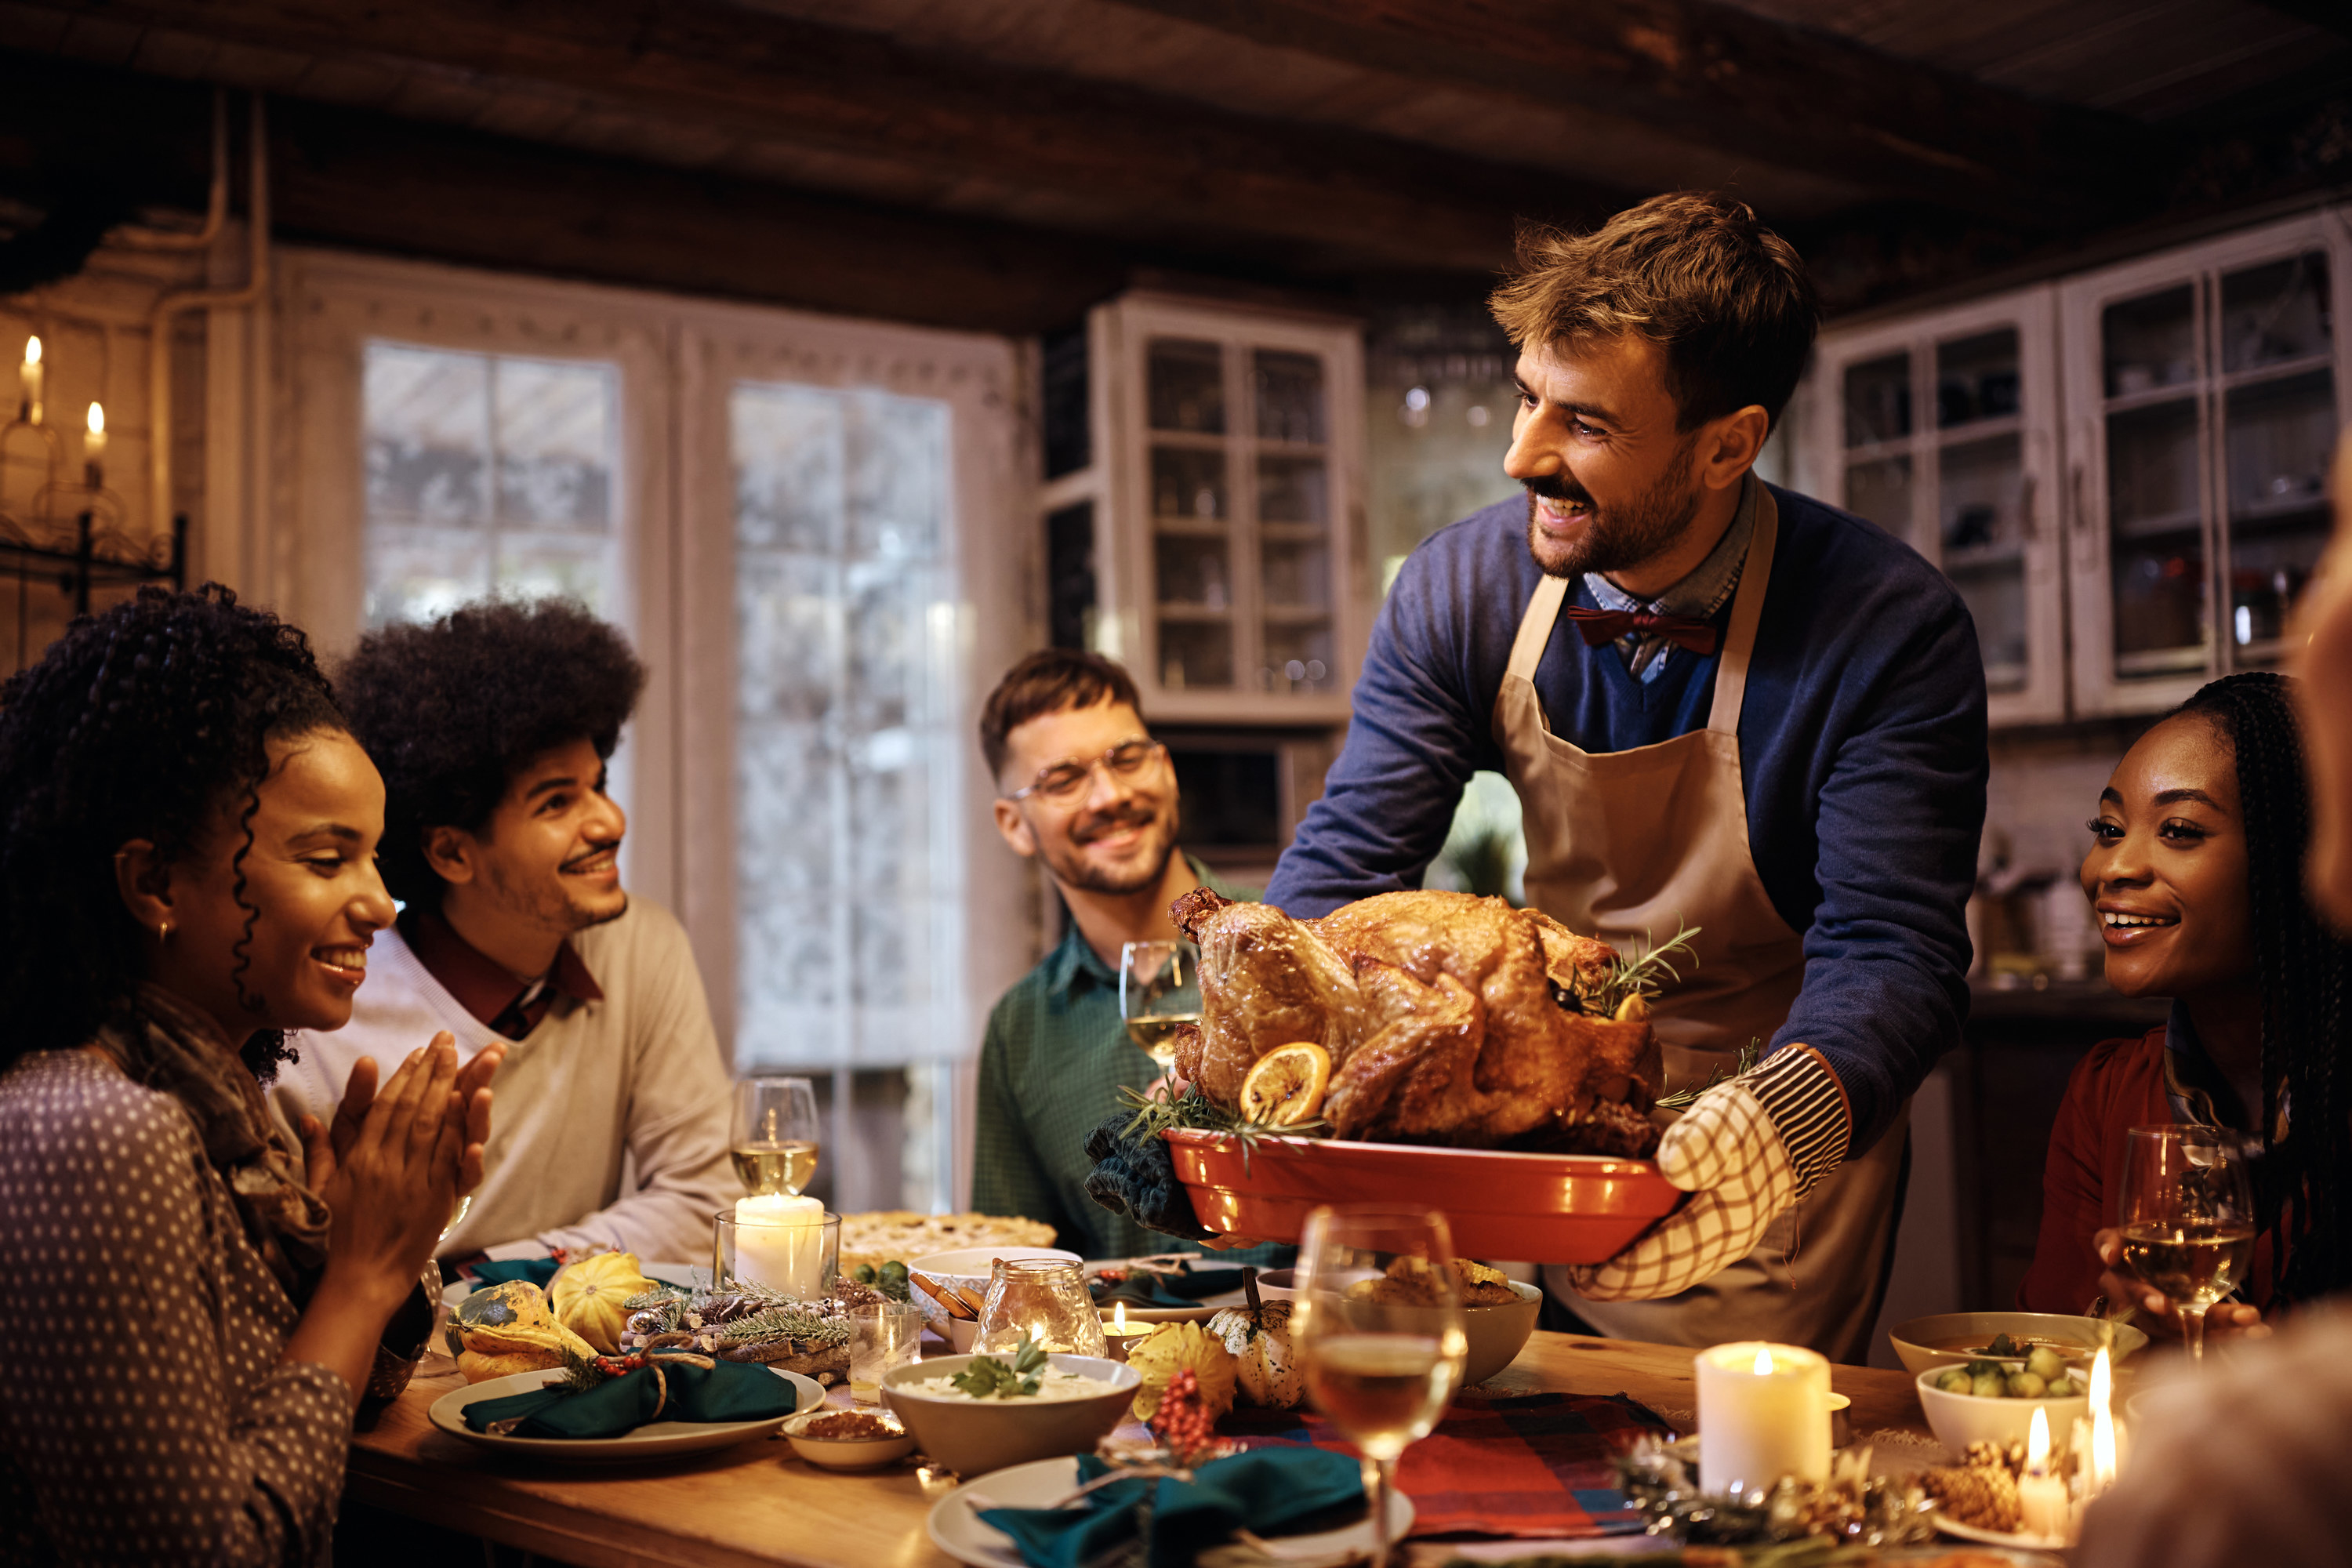 Happy man serving roasted turkey during Thanksgiving dinner with friends at dining table